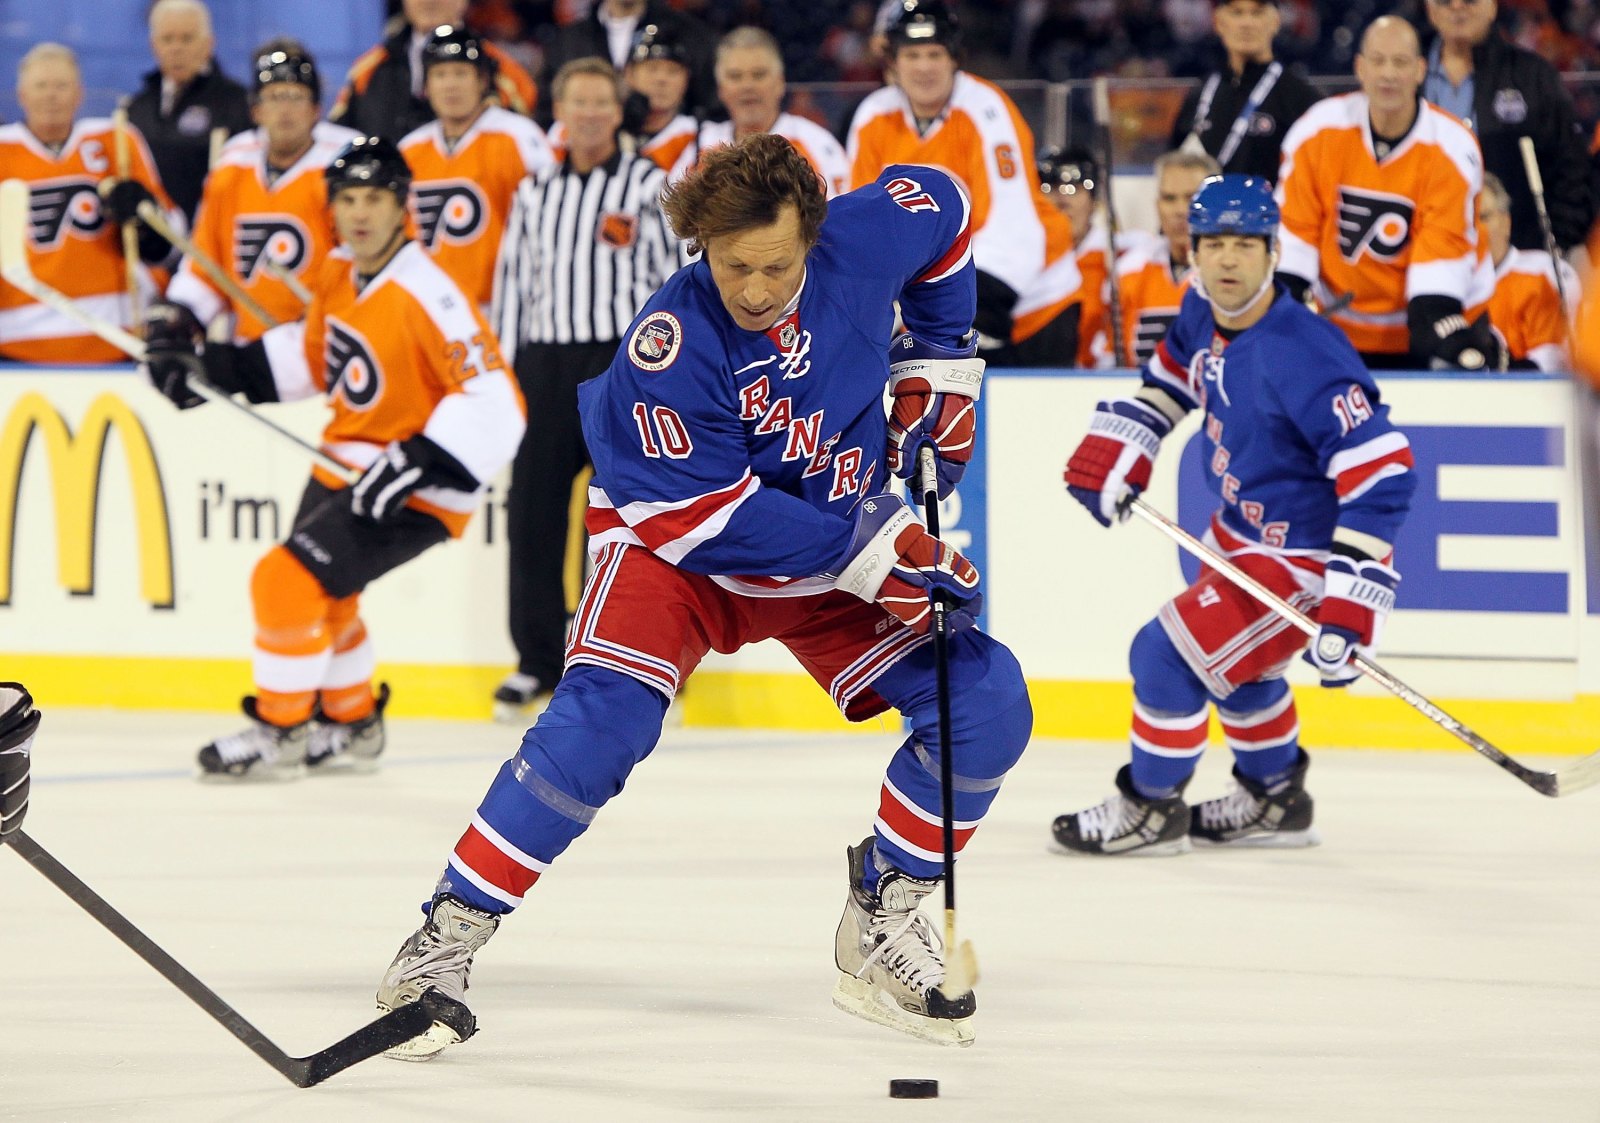 New York Rangers: Why Duguay's absence is a good thing